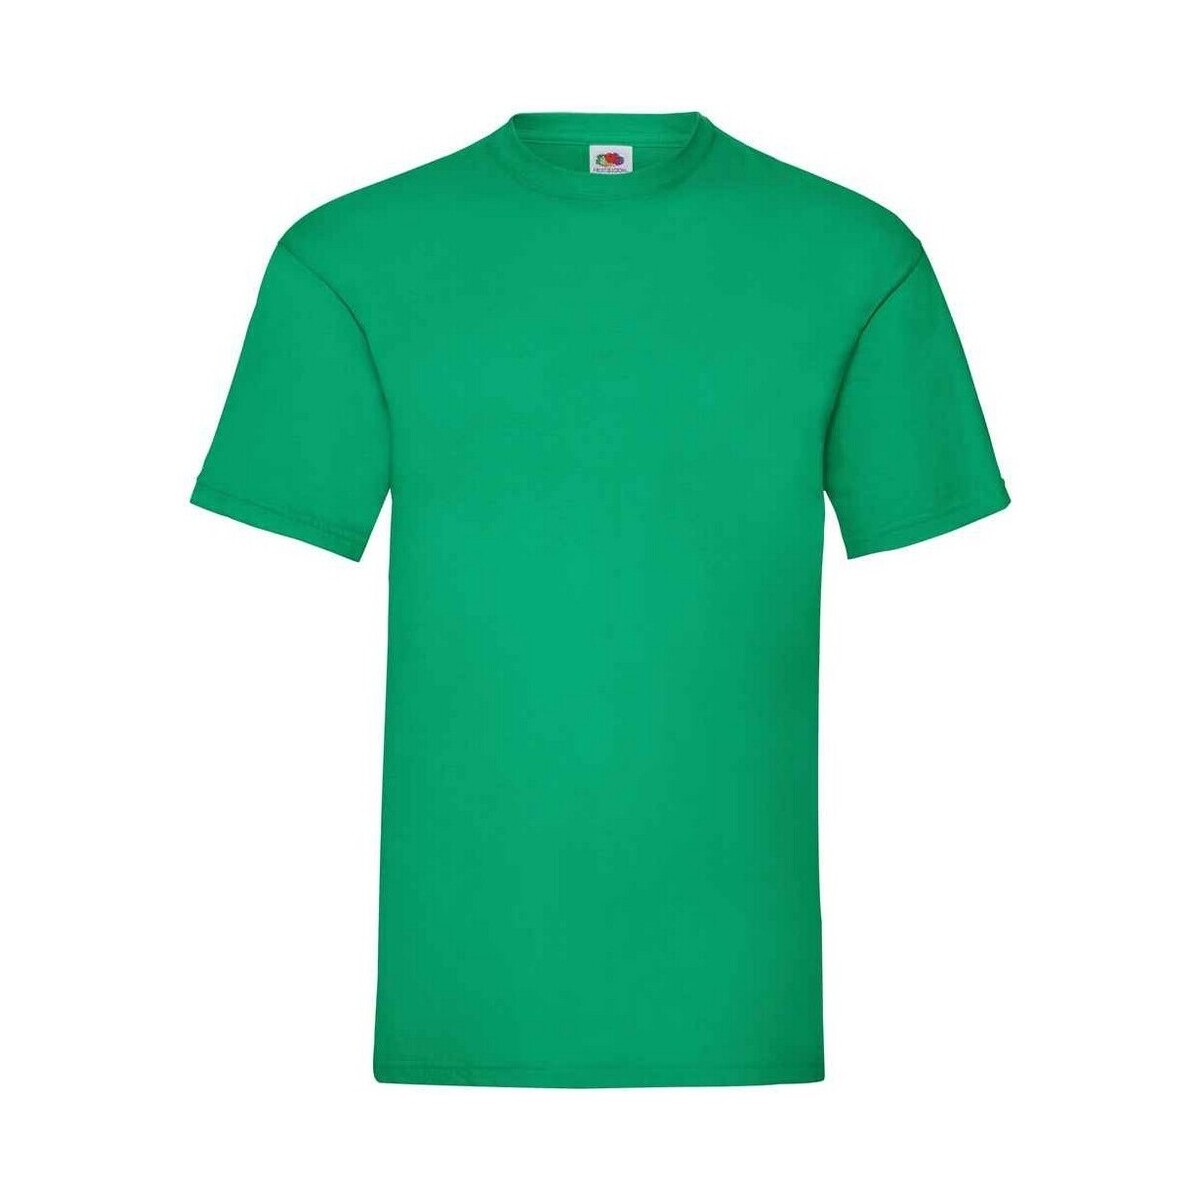 Abbigliamento Uomo T-shirts a maniche lunghe Fruit Of The Loom Valueweight Verde